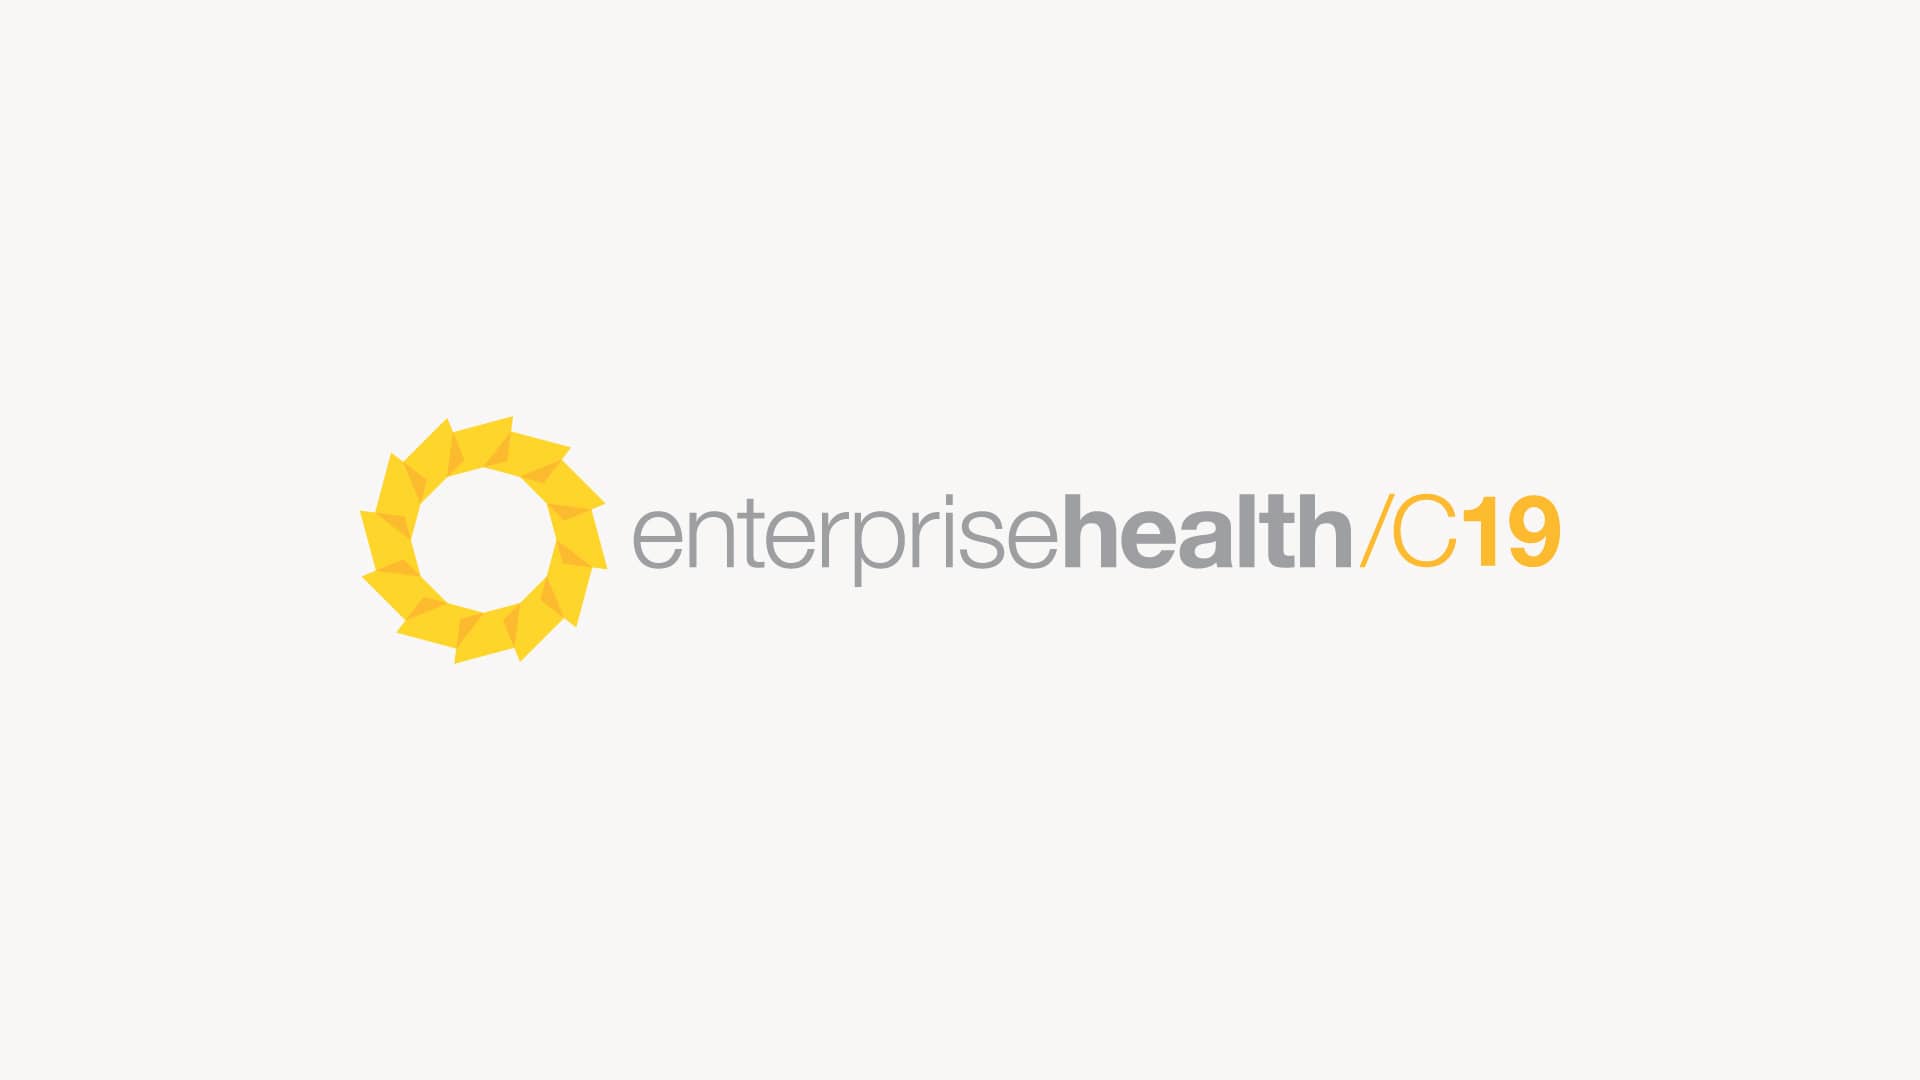 Enterprise Health launched Channel-19, a stand-alone application to help employers and hospital systems monitor their employees for Coronavirus.